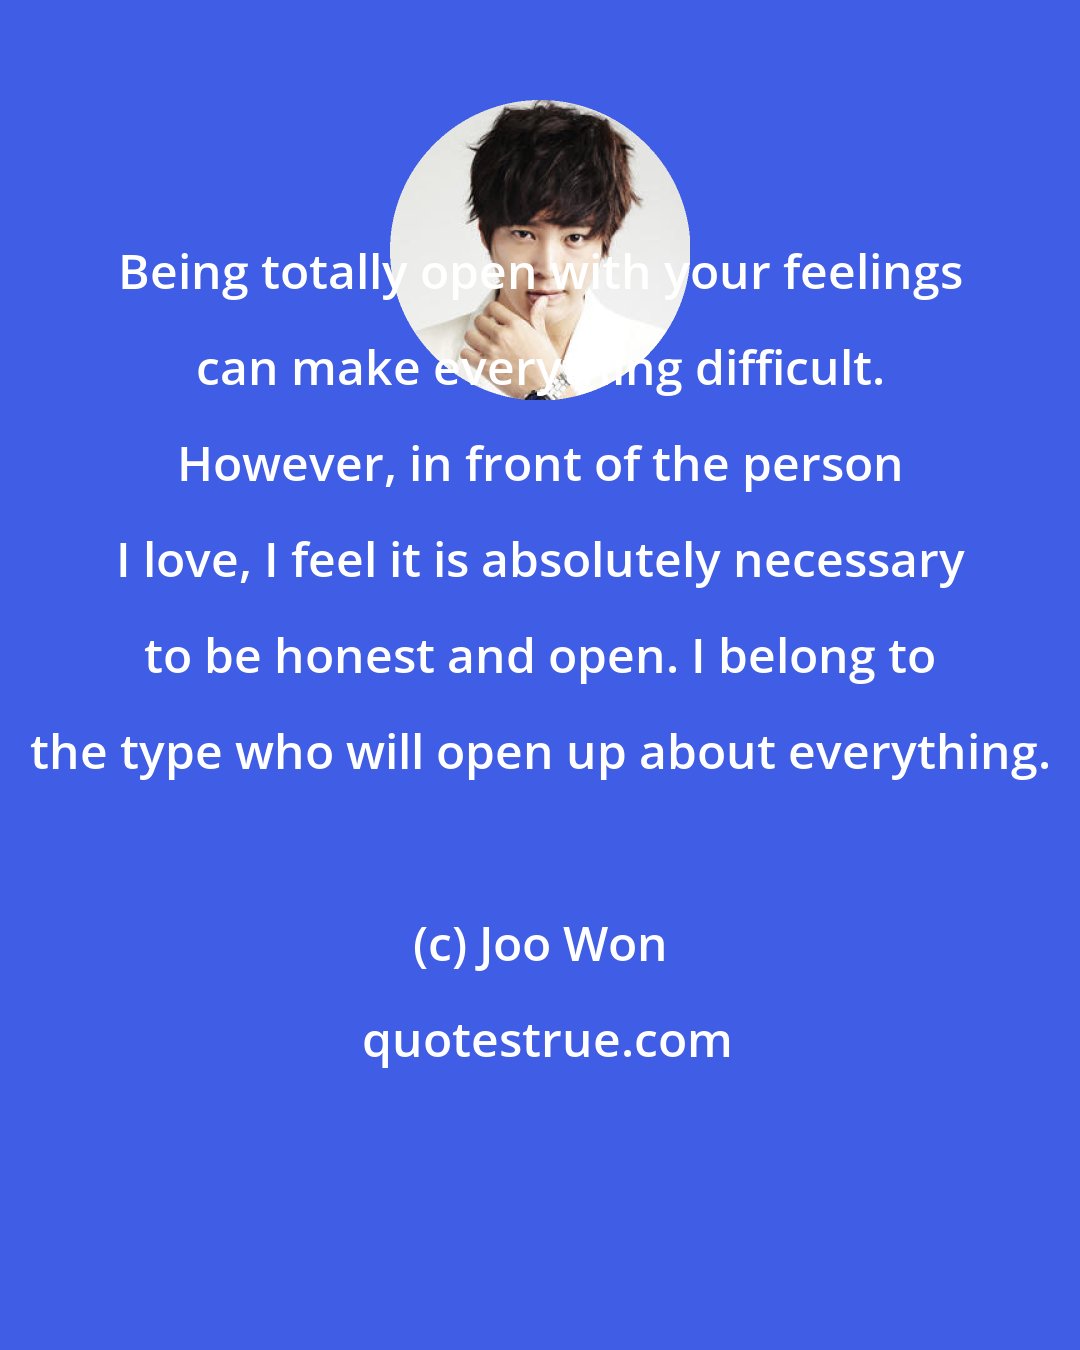 Joo Won: Being totally open with your feelings can make everything difficult. However, in front of the person I love, I feel it is absolutely necessary to be honest and open. I belong to the type who will open up about everything.